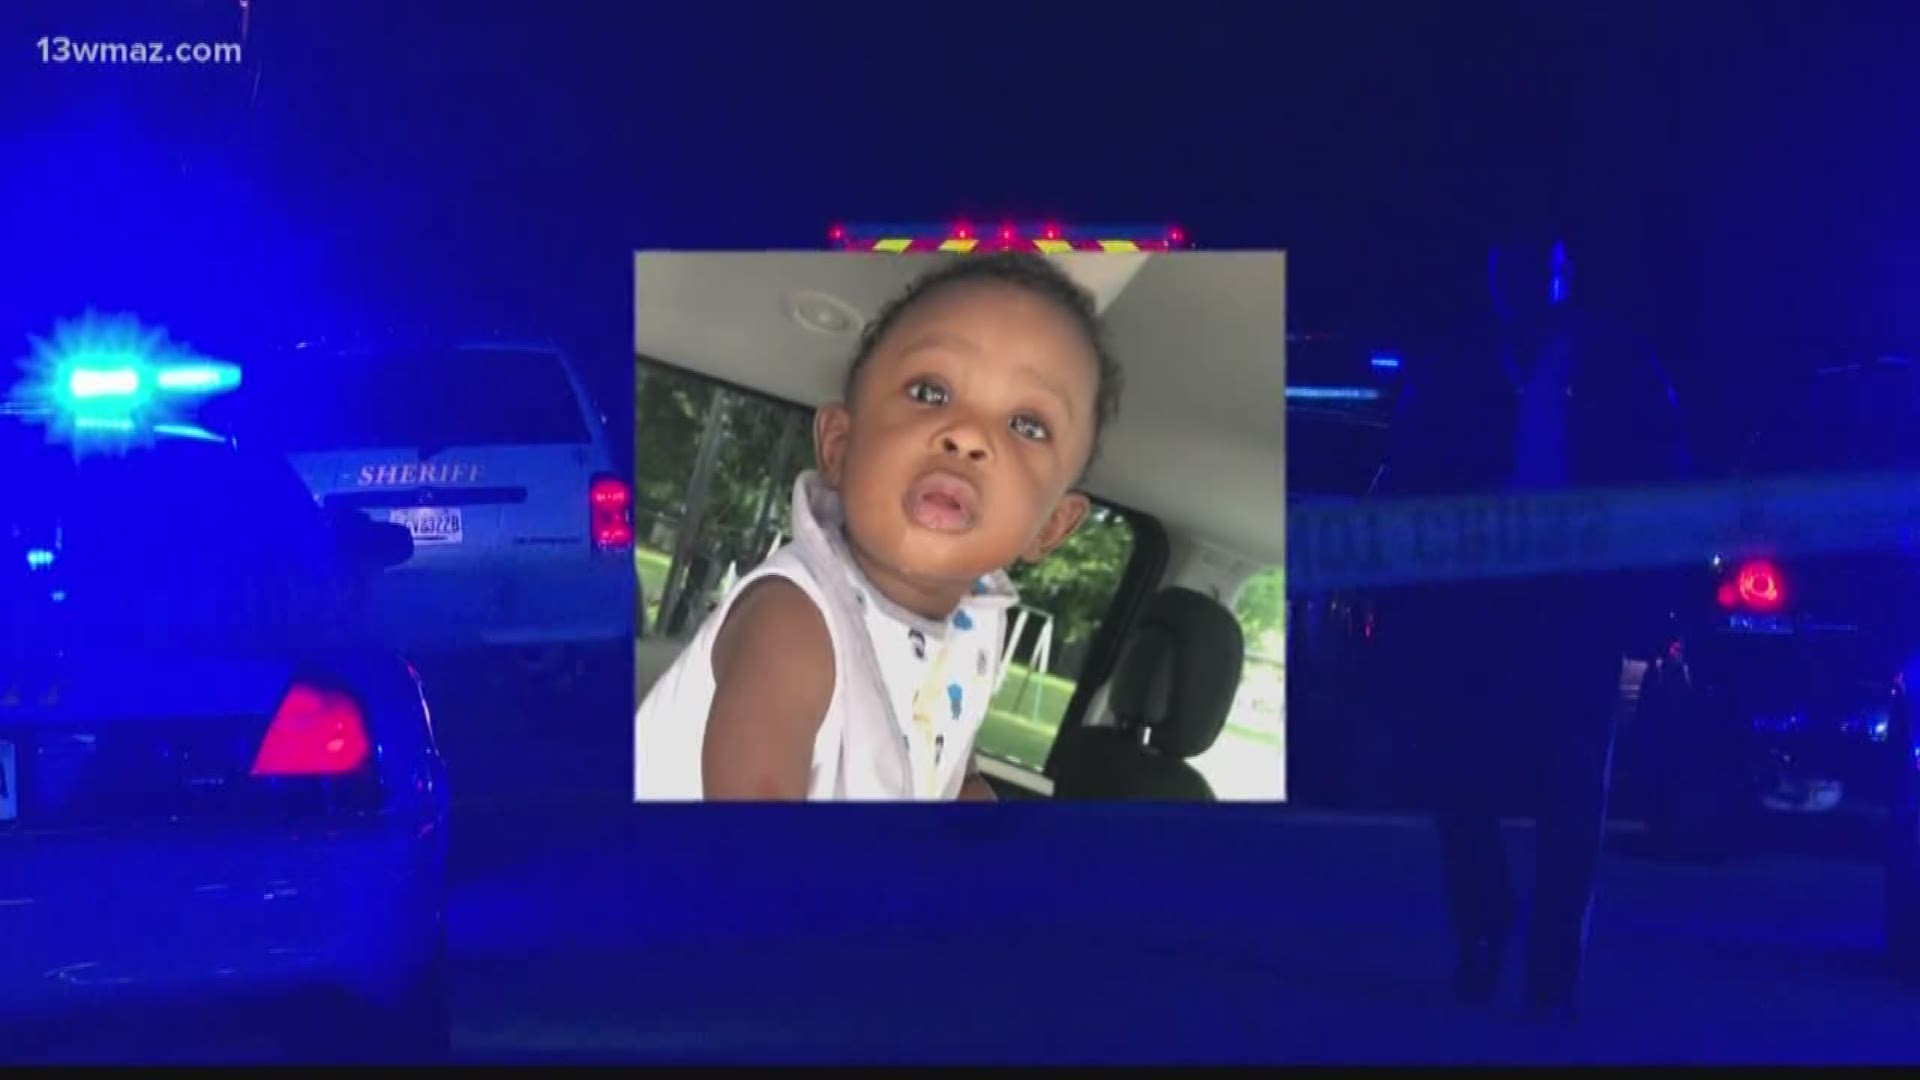 The Georgia Bureau of Investigation says an Amber Alert was issued around 1 a.m. Wednesday for the son, 2-year-old King, but an alert didn't go out for 7 hours.